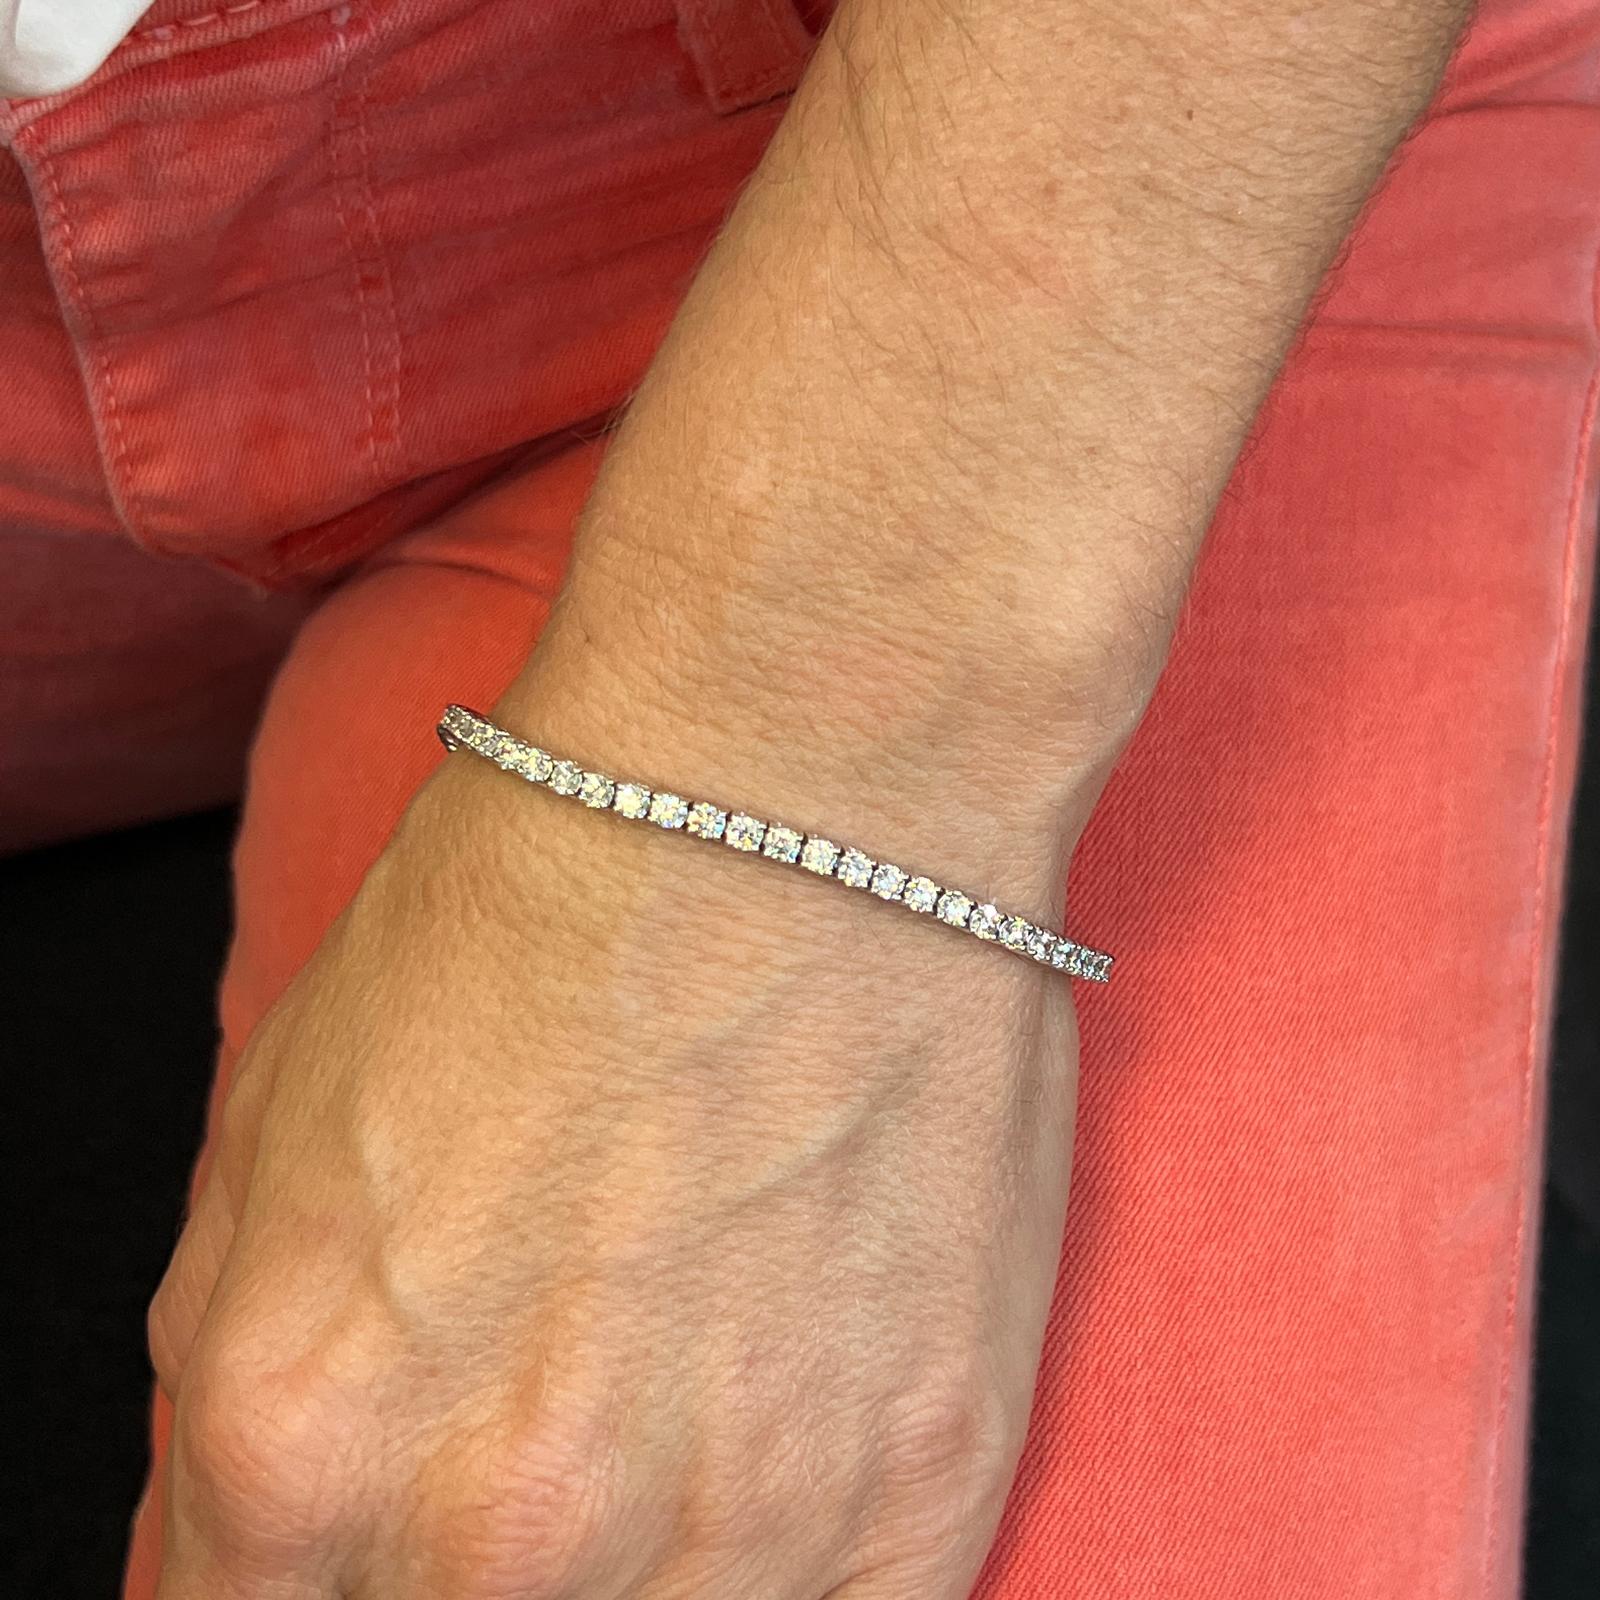 Diamond modern tennis bracelet crafted in 14 karat white gold. The bracelet features 57 round brilliant cut diamonds weighing 4.62 CTW and graded G-H color and SI1 clarity. The bracelet measures 7 inches in length and 3.1mm in width. 